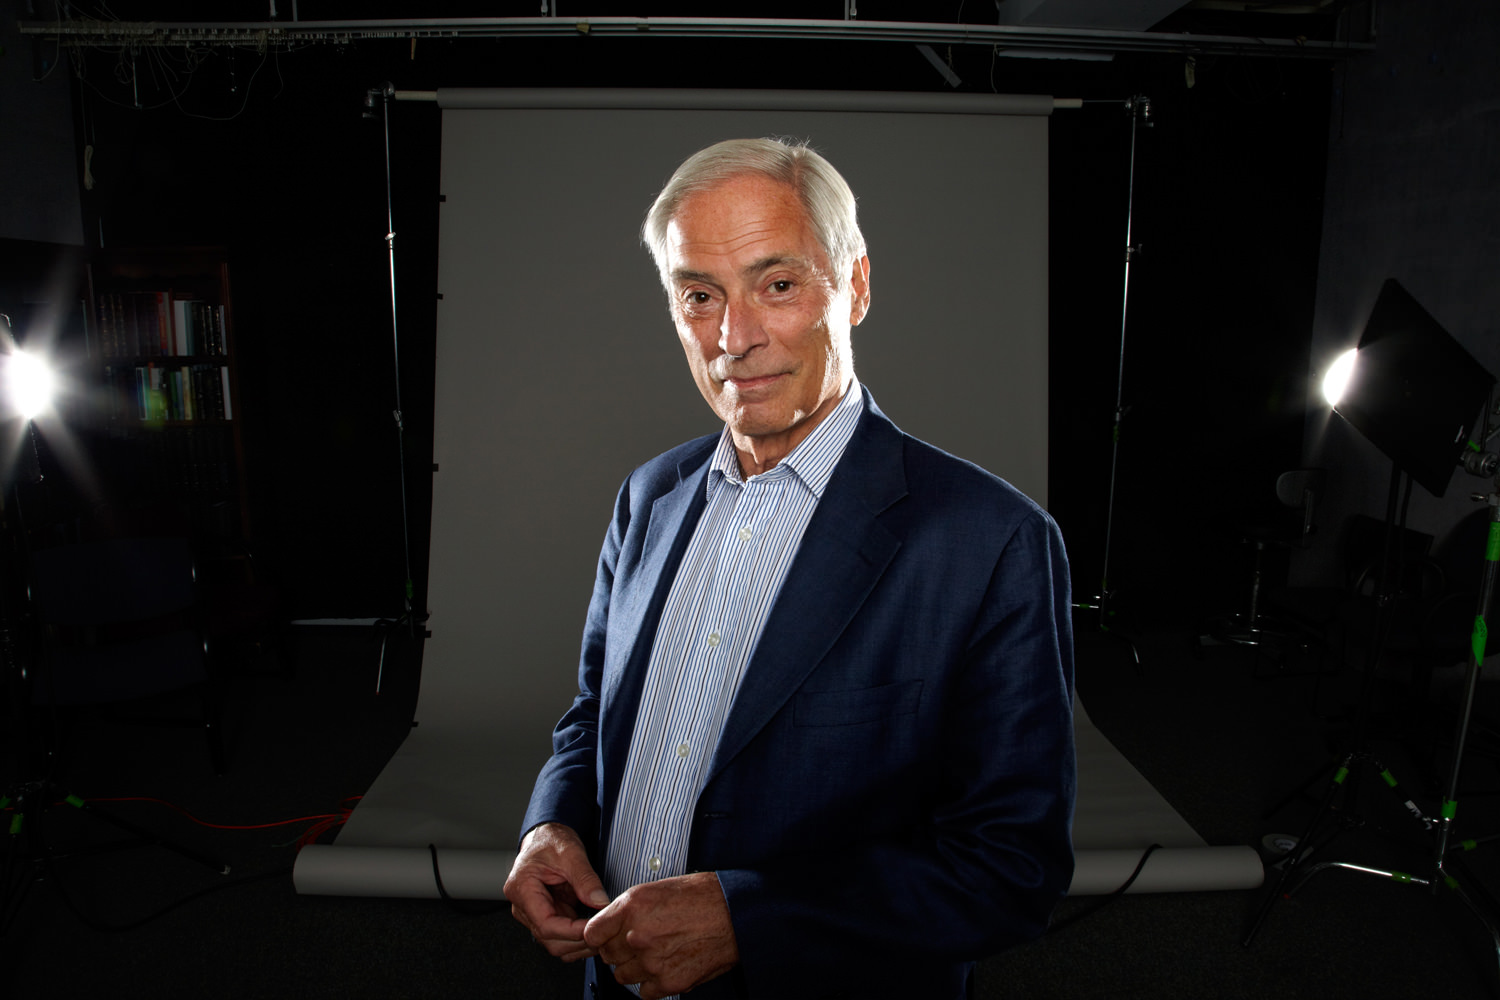 CBS Newsman Bob Simon of “60 Minutes,” One of the Greats, Dead at 73